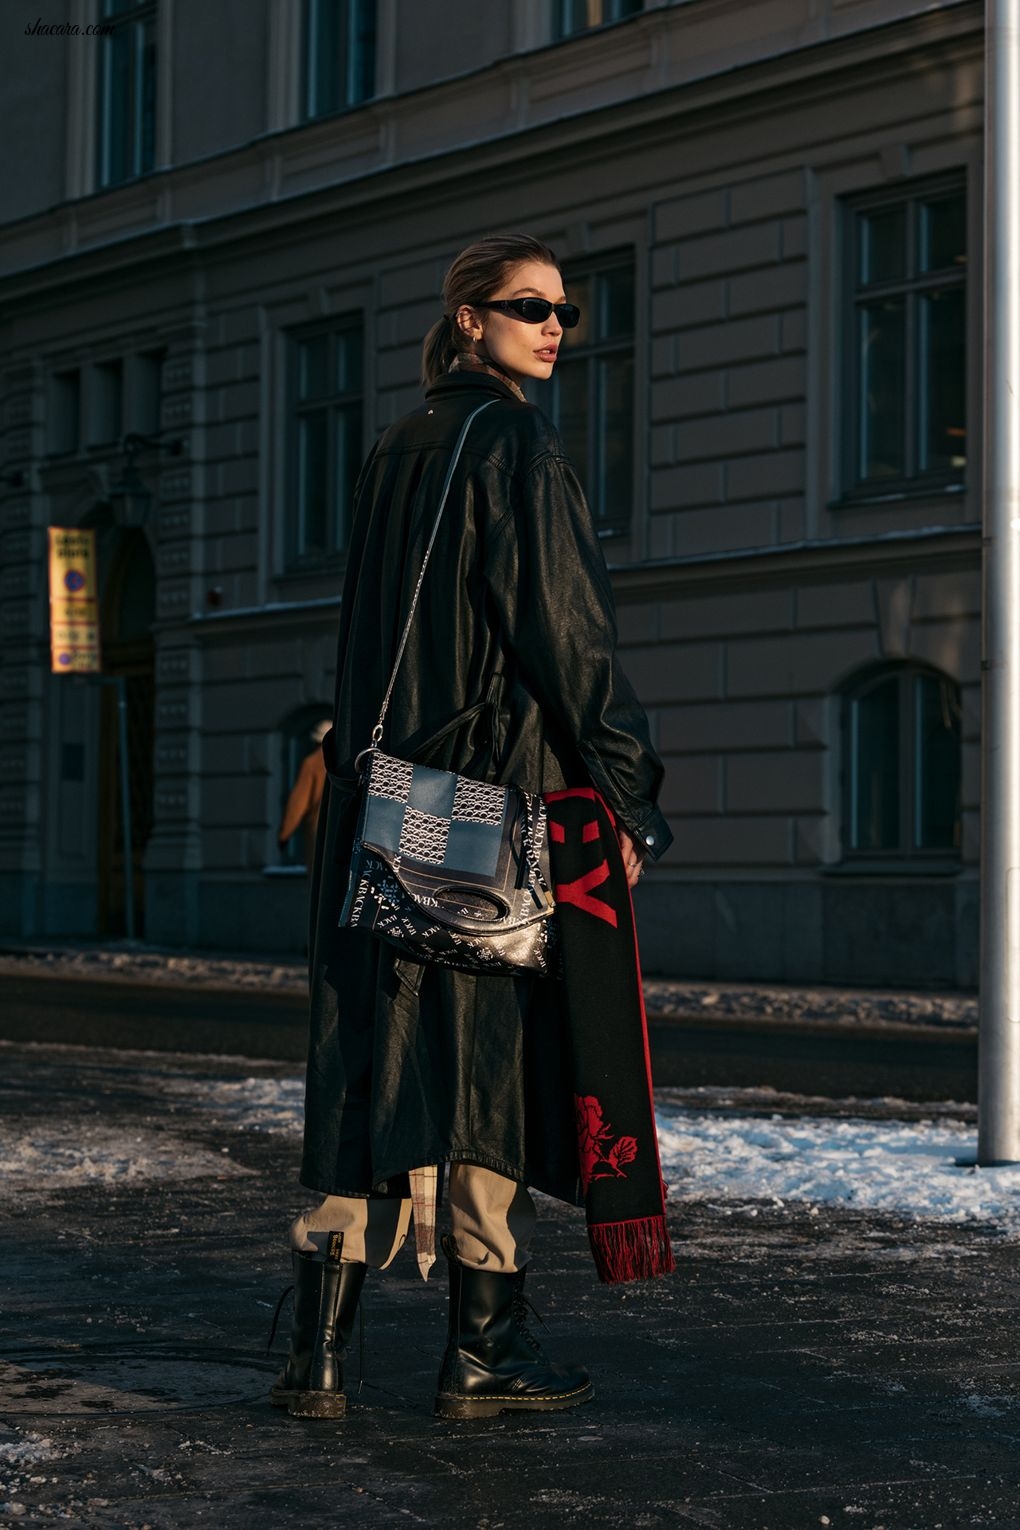 Check Out The Fashionistas At The Stockholm Fashion Week